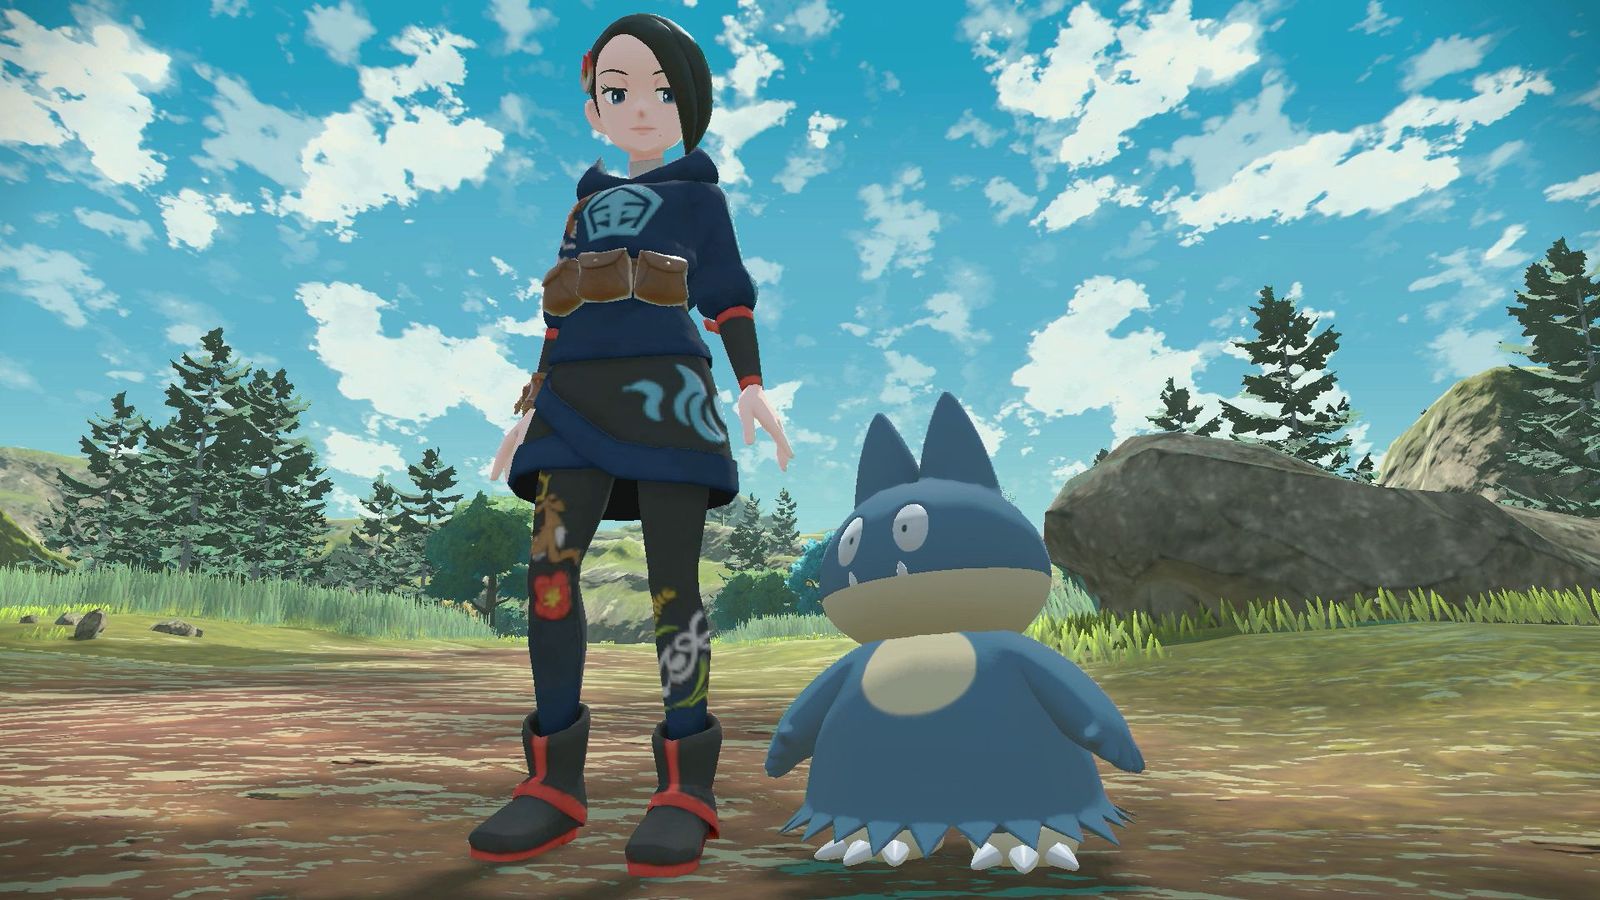 A Pokémon Warden stands in a field, looking down at her buddy Munchlax.